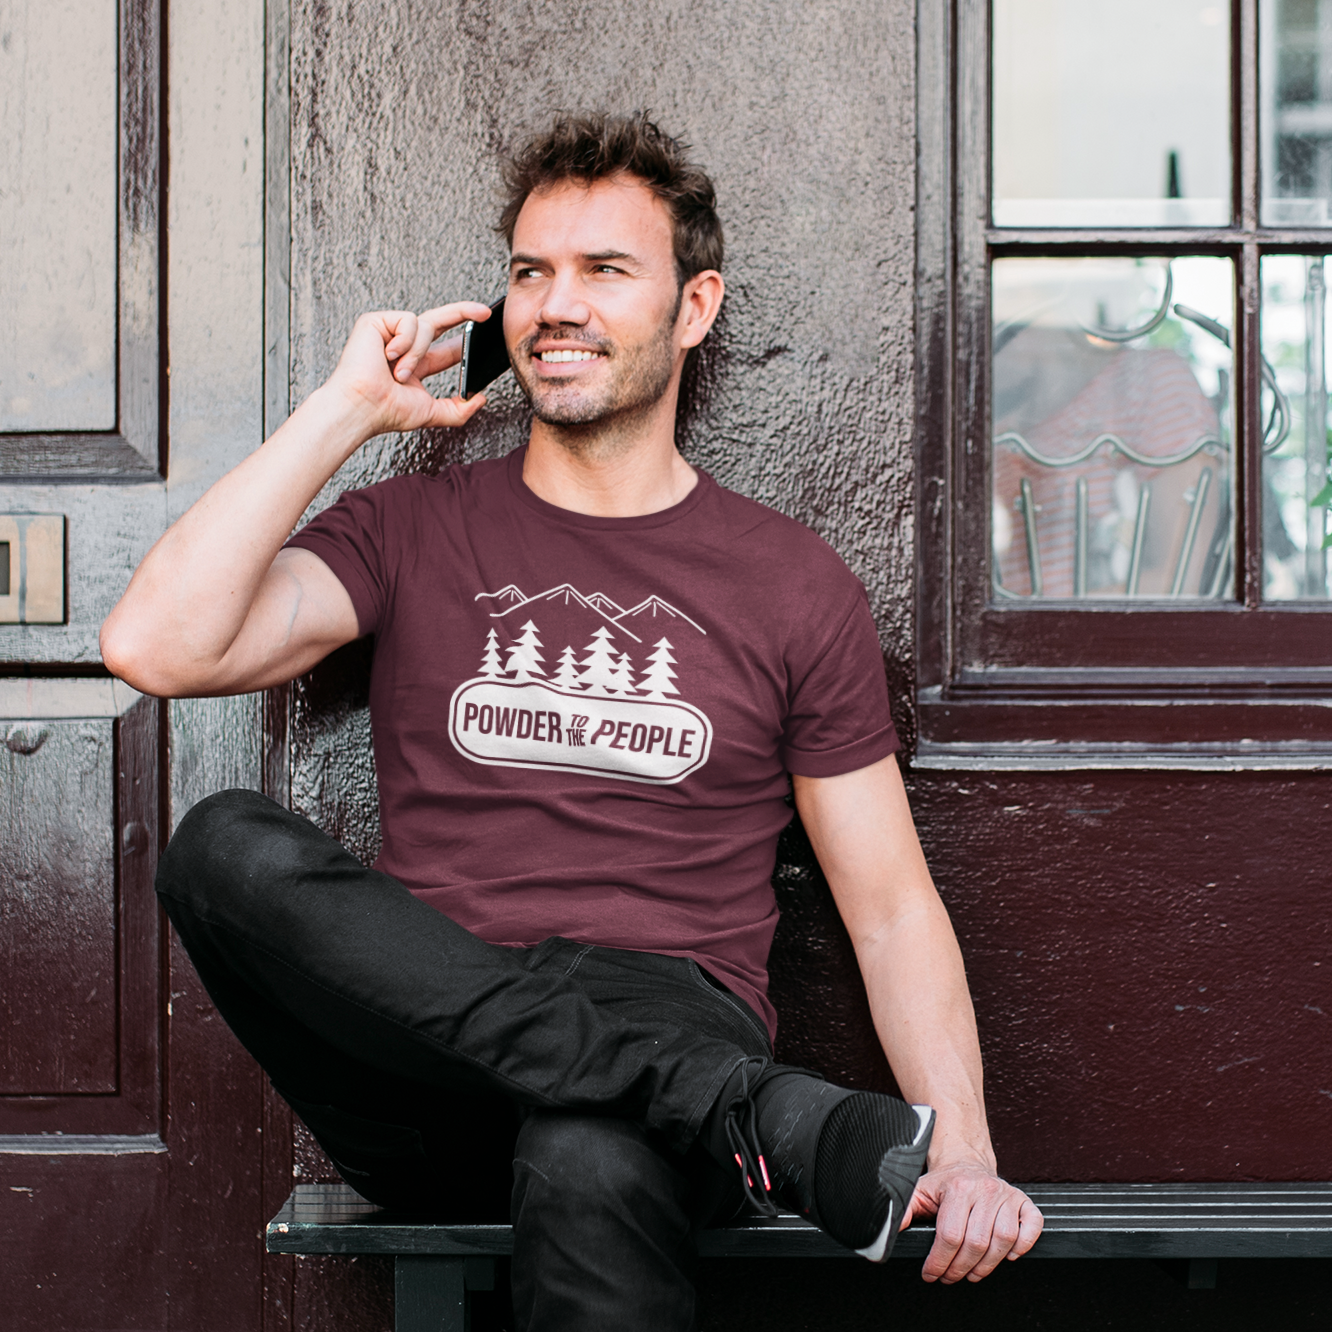 MMan calling on phone, wearing burgundy shirt with 'Powder to the people' print by KMLeon.